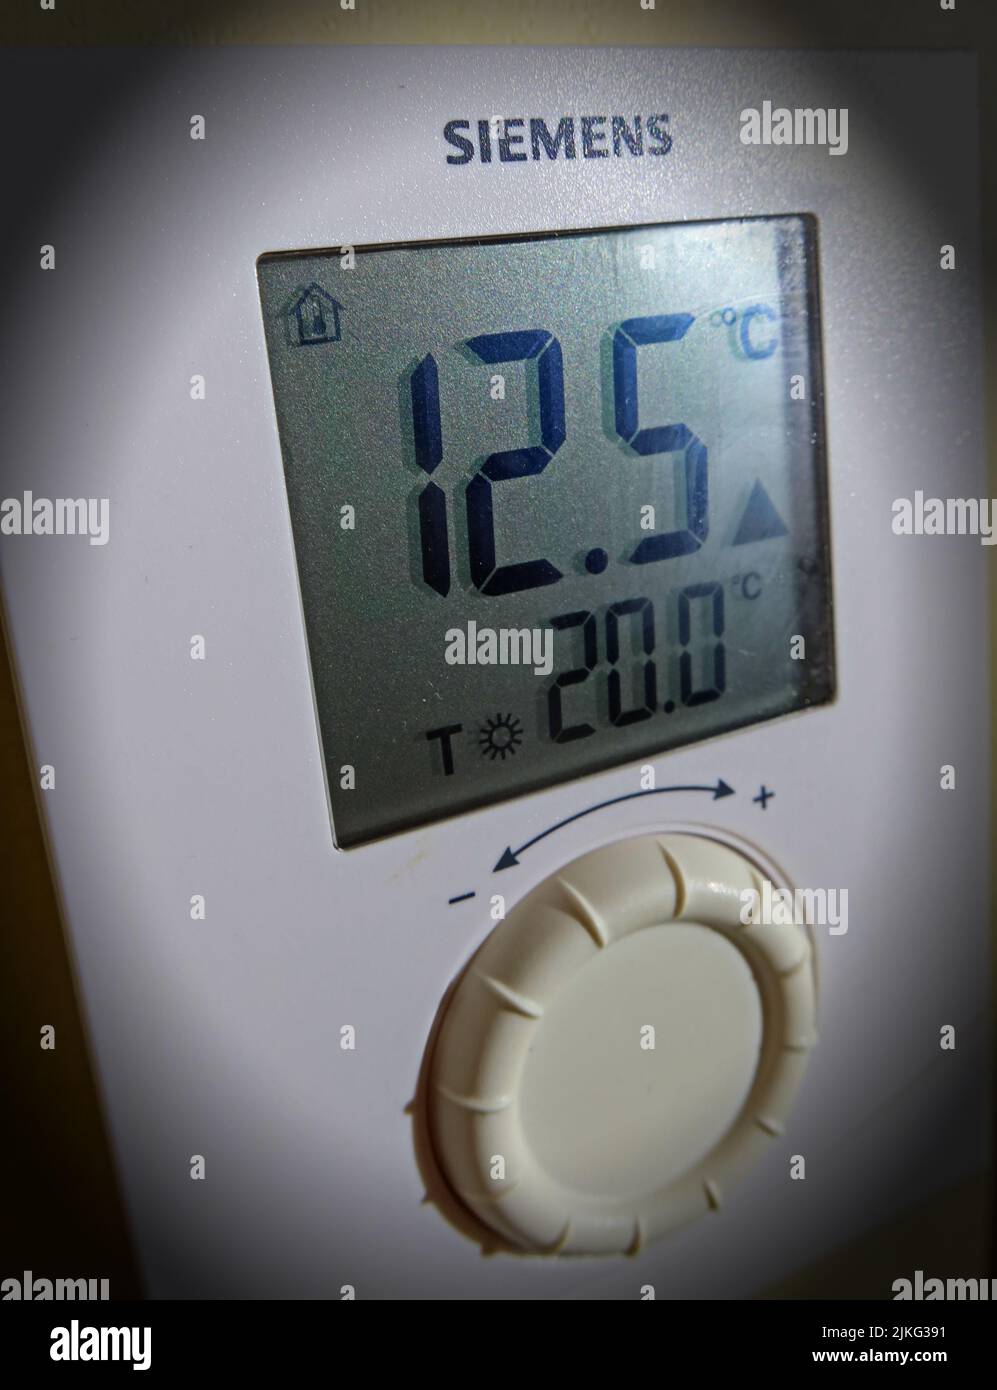 Cold house 12deg, Help with rising fuel bills, poor customers unable to pay Stock Photo